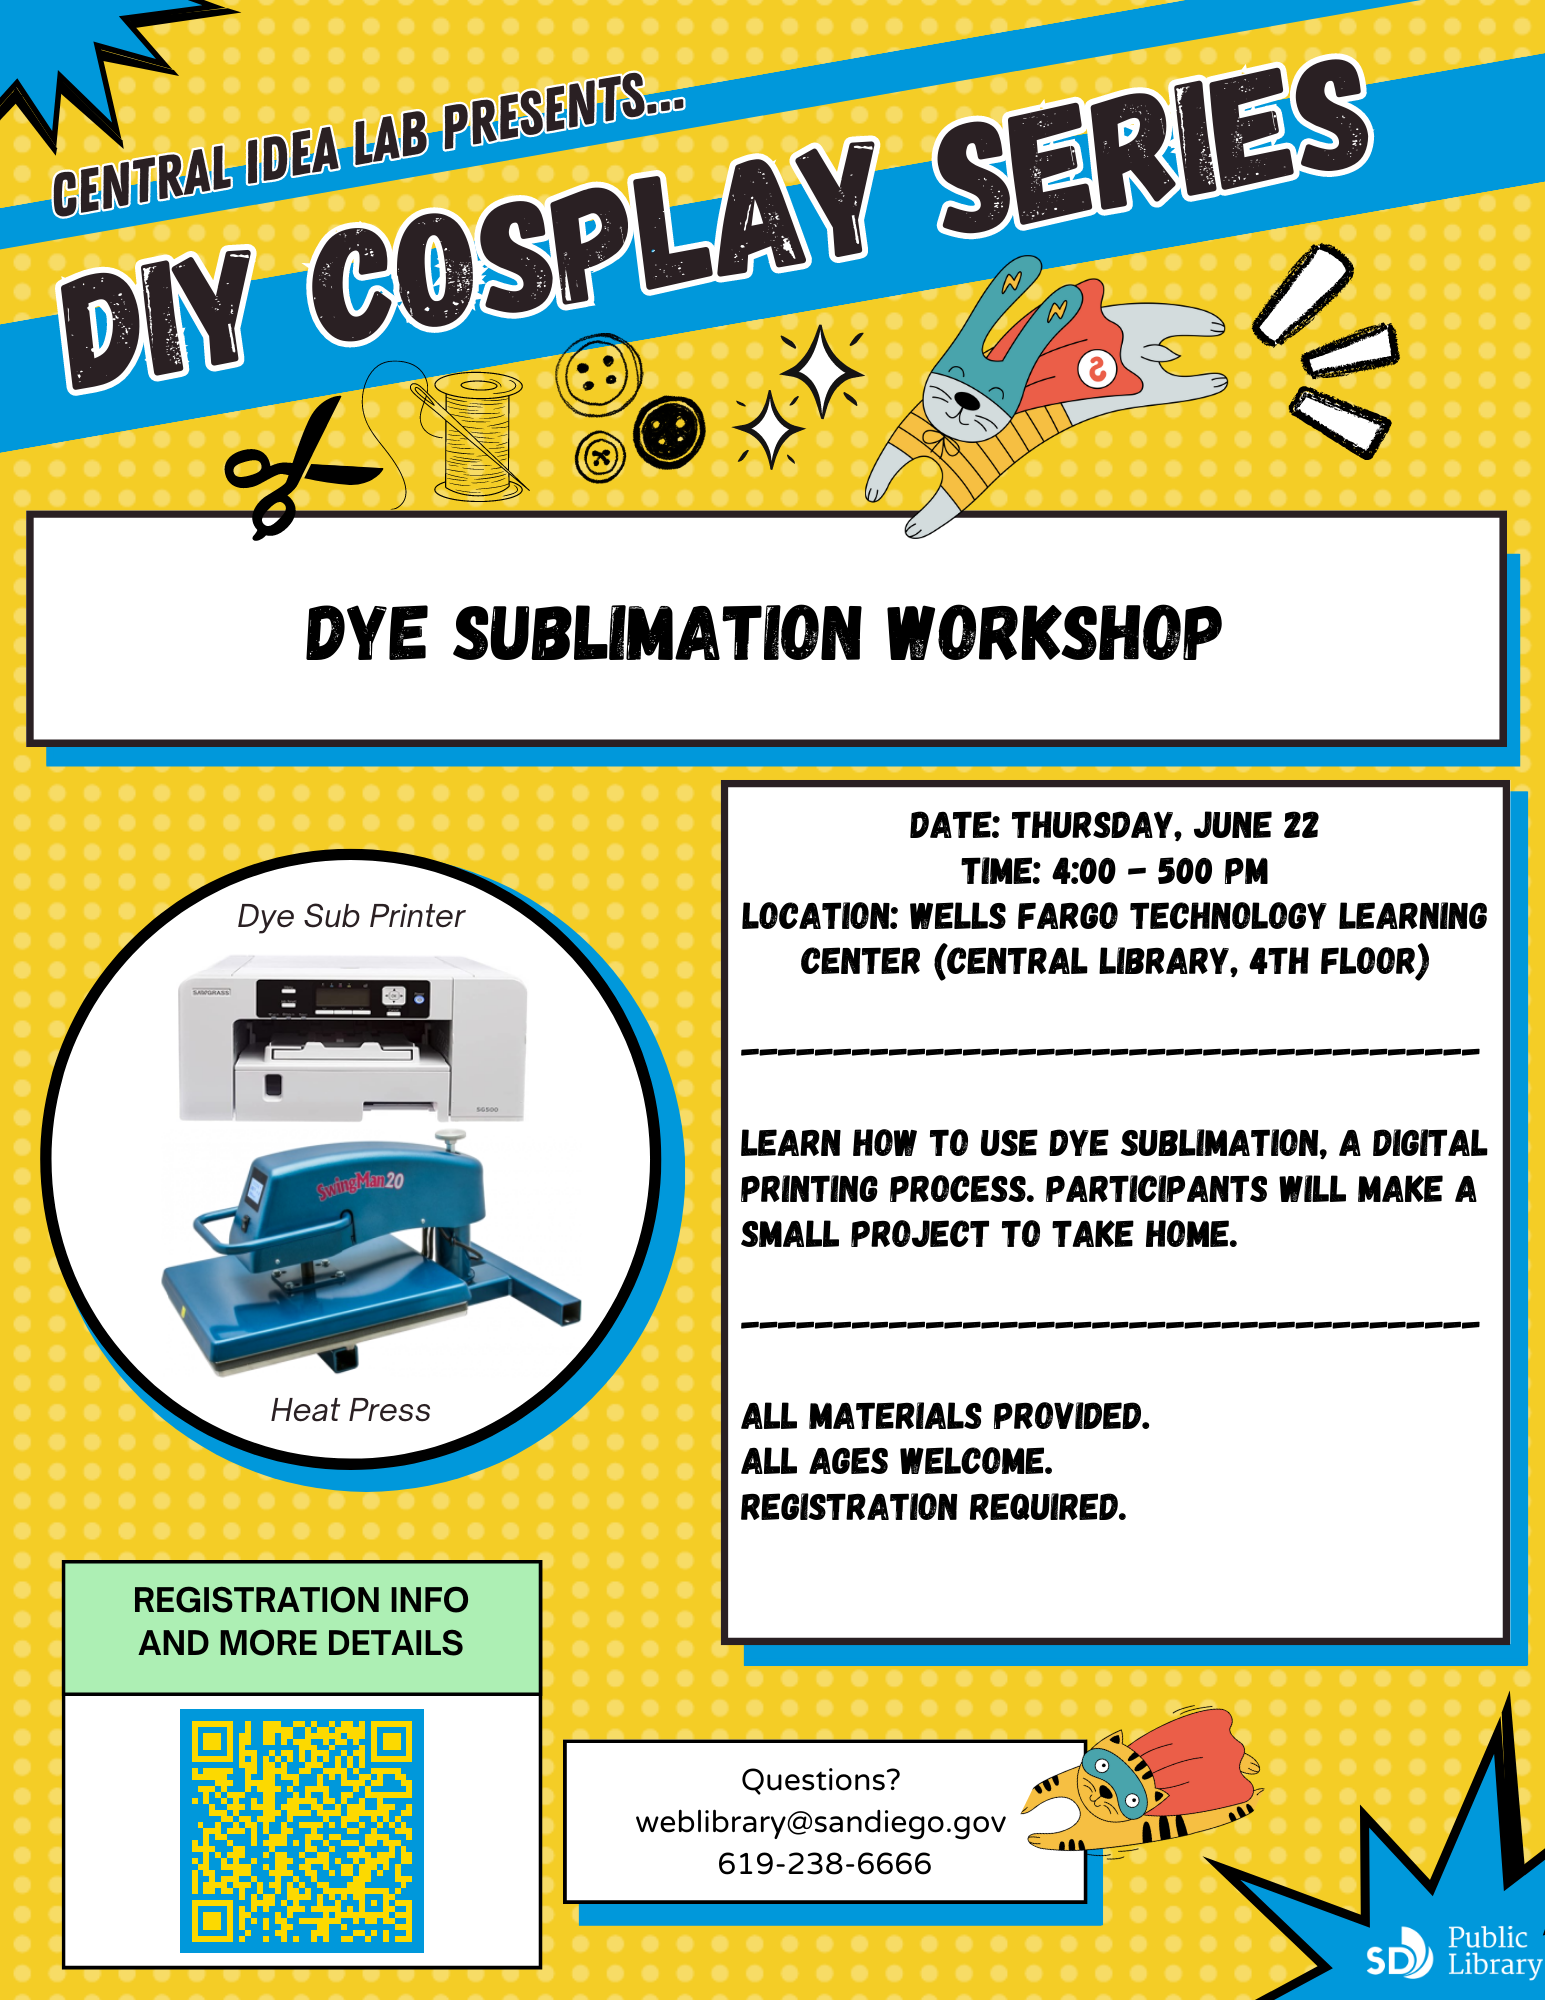 DIY Cosplay Series: Dye Sublimation